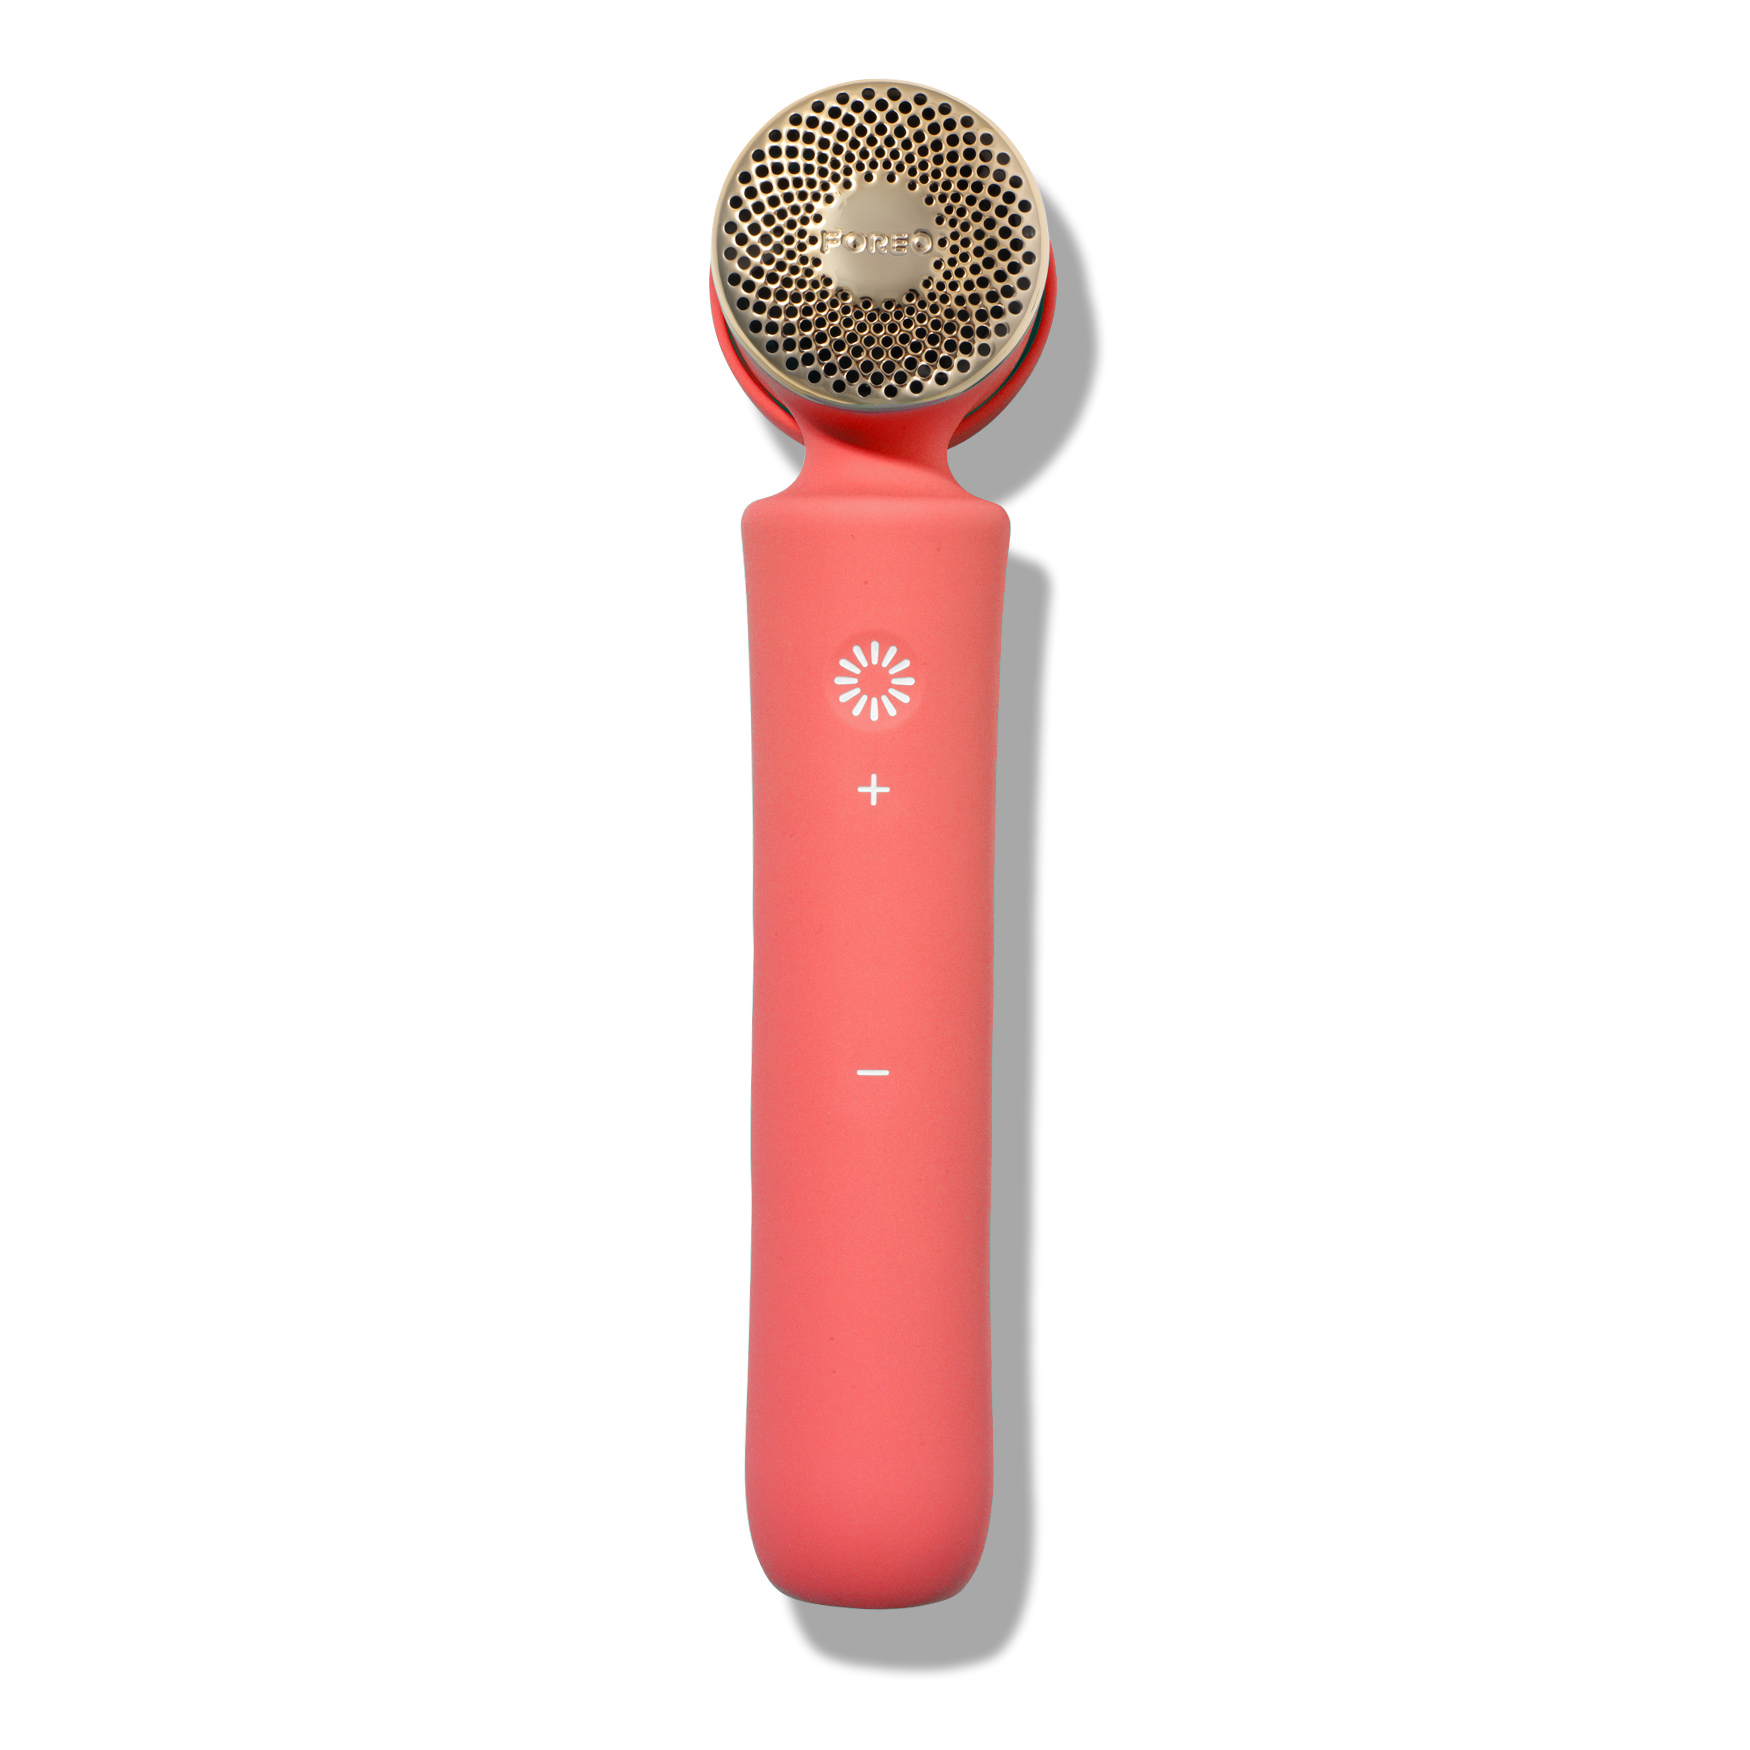 Foreo Peach 2 IPL Hair Removal Device | Space NK